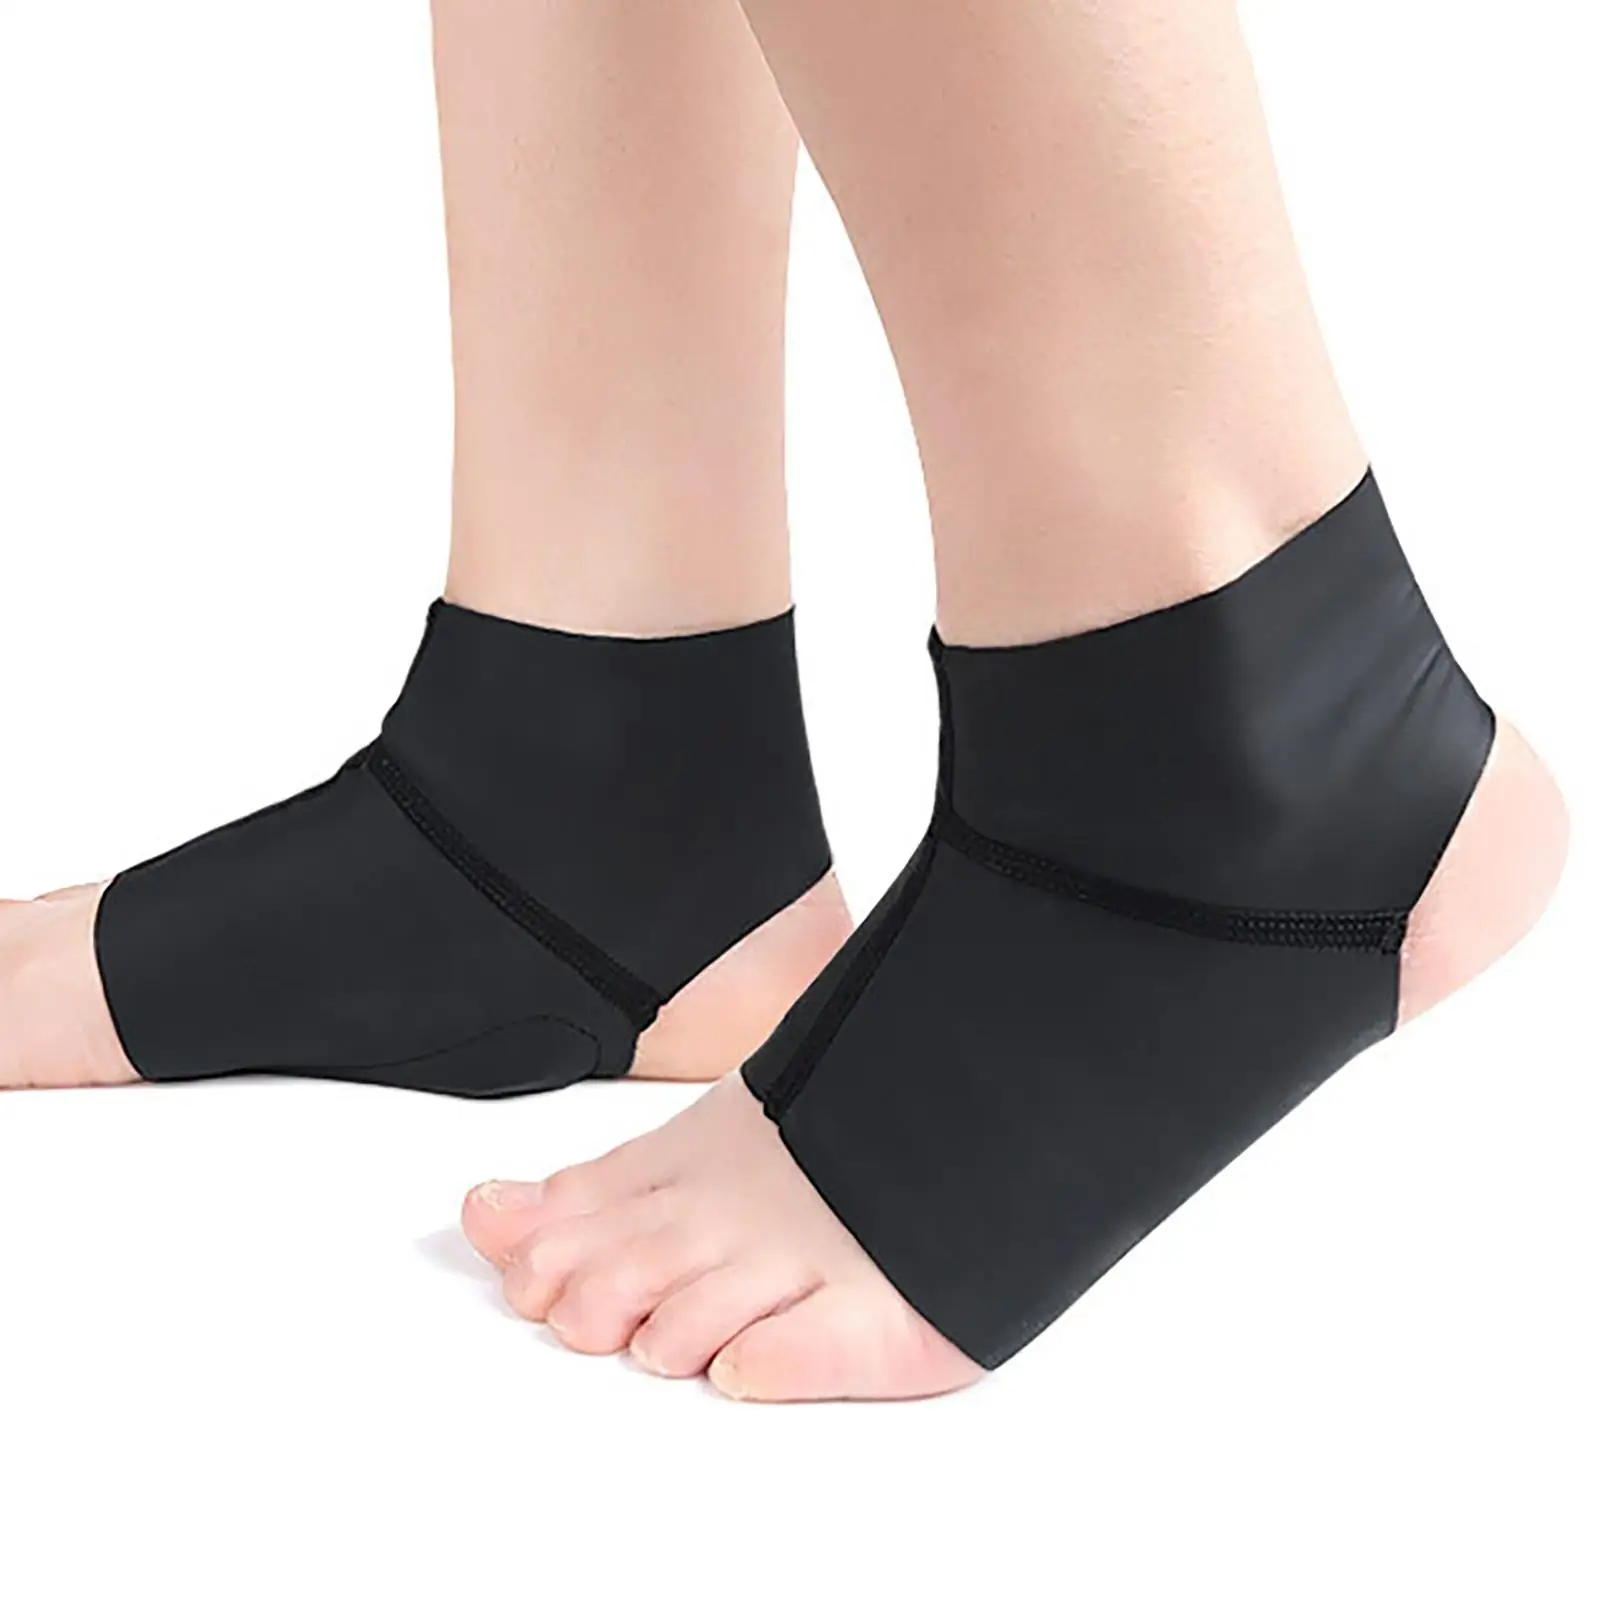 Set of 2 Elastic  Ankle Compression  Breathable Durable Orthopedic Arch Support Foot Pad  for Running Sports Cycling Riding